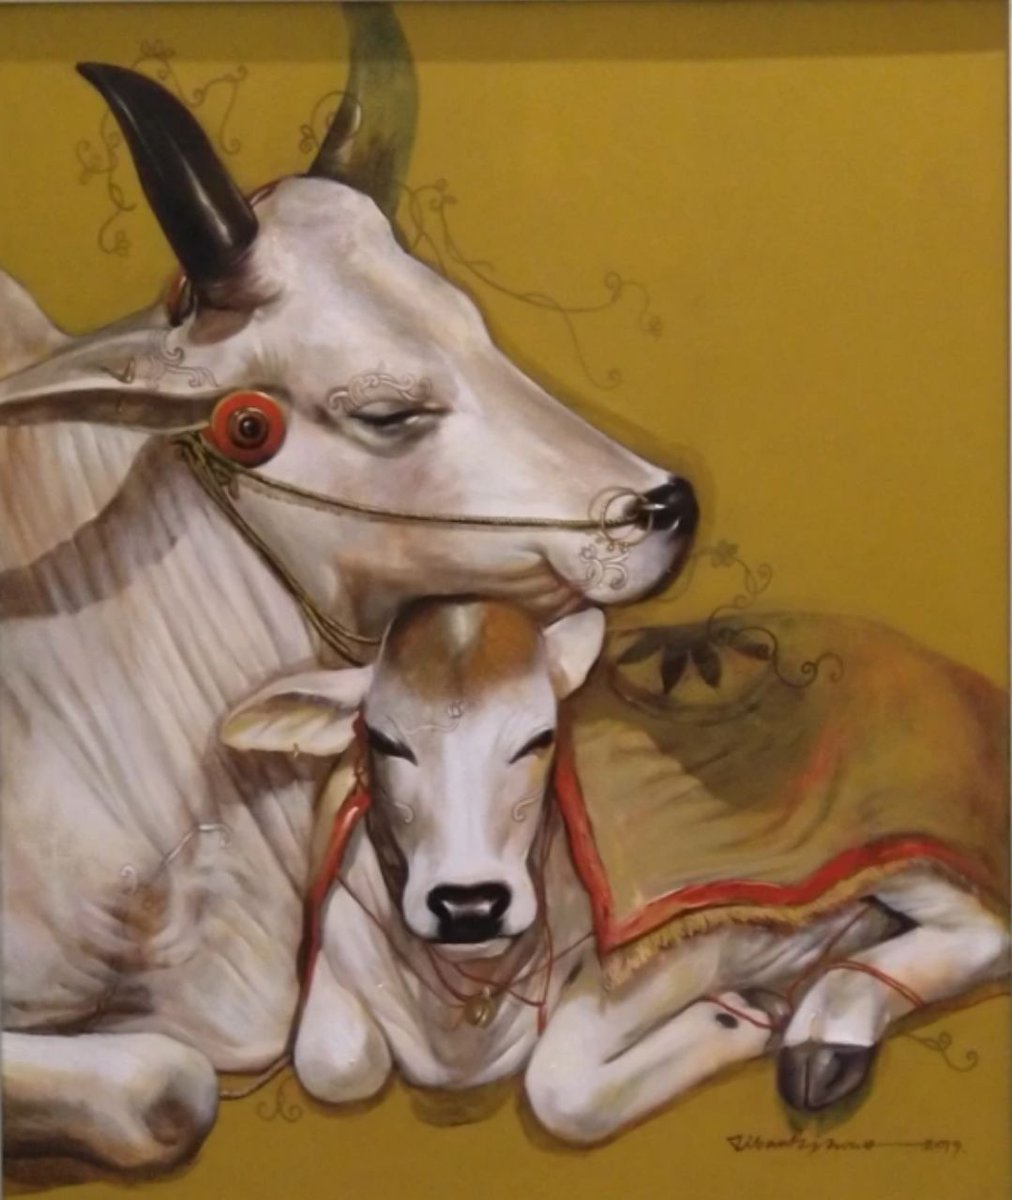 Mother cow Cow has a special place in Hindu culture it is an integral part of our culture. There are many mentions in our scriptures where Cow is considered as equivalent to god. The value of cow can be reflected by our traditions, culture and even our day to day life.